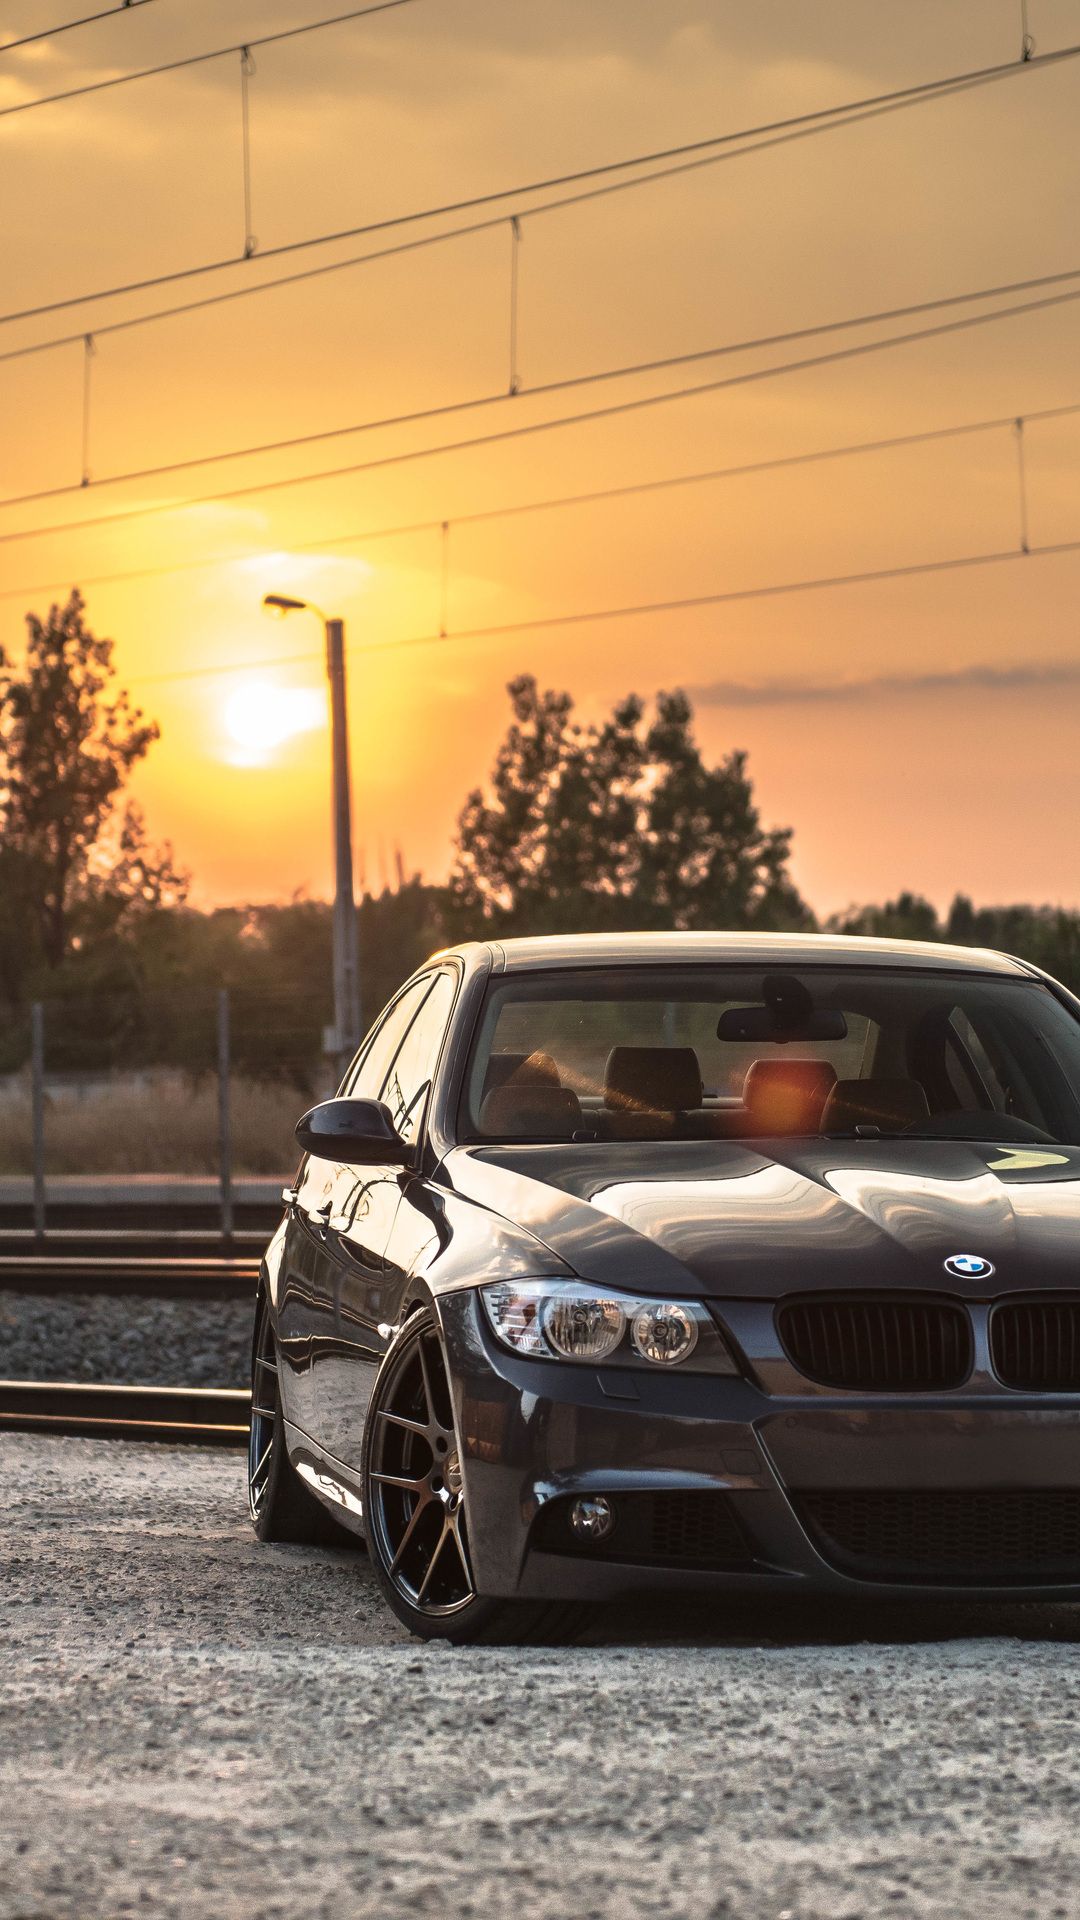 disks, tuning, deep concave, sunset, bmw, bmw, e90